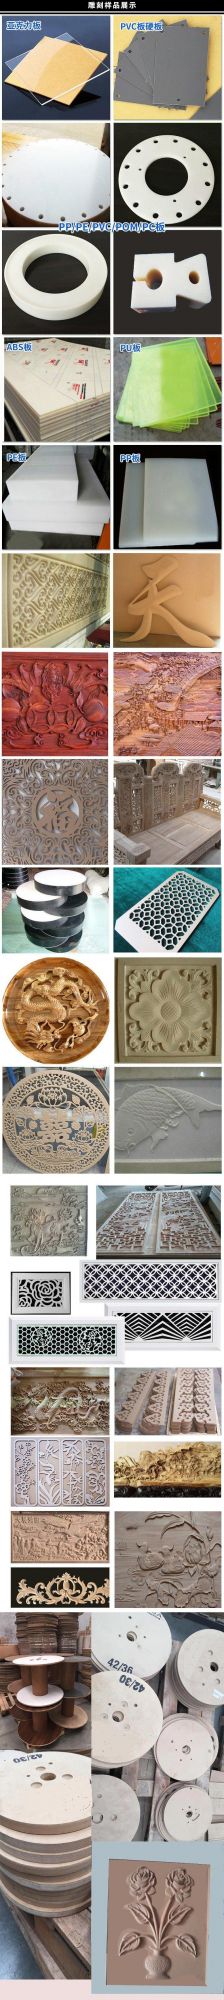 1325 CNC Router Wood CNC Engraving Woodworking CNC Cutting Machine